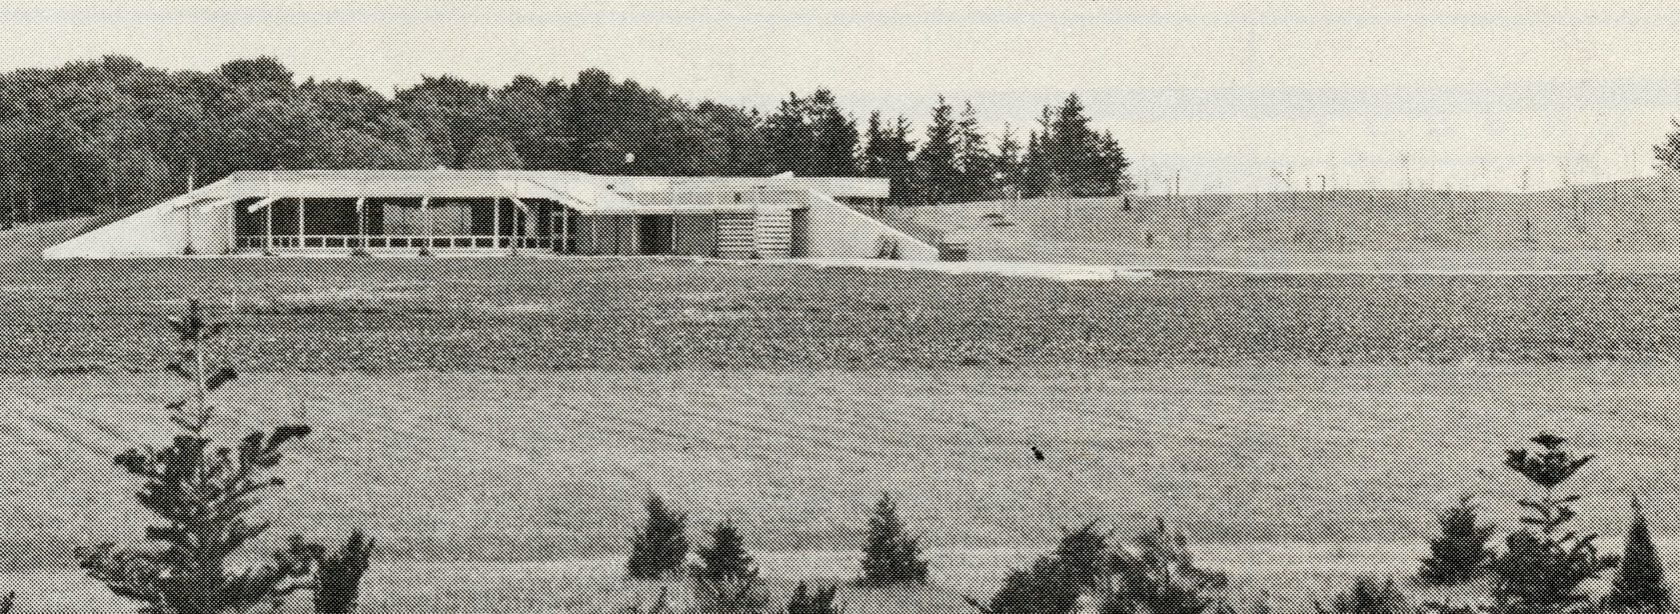 A concrete building with large glass windows sits built into the side of a hill. A large open lawn rests in front of the building. Some small conifer saplings are planted into the lawn at the base of the picture.